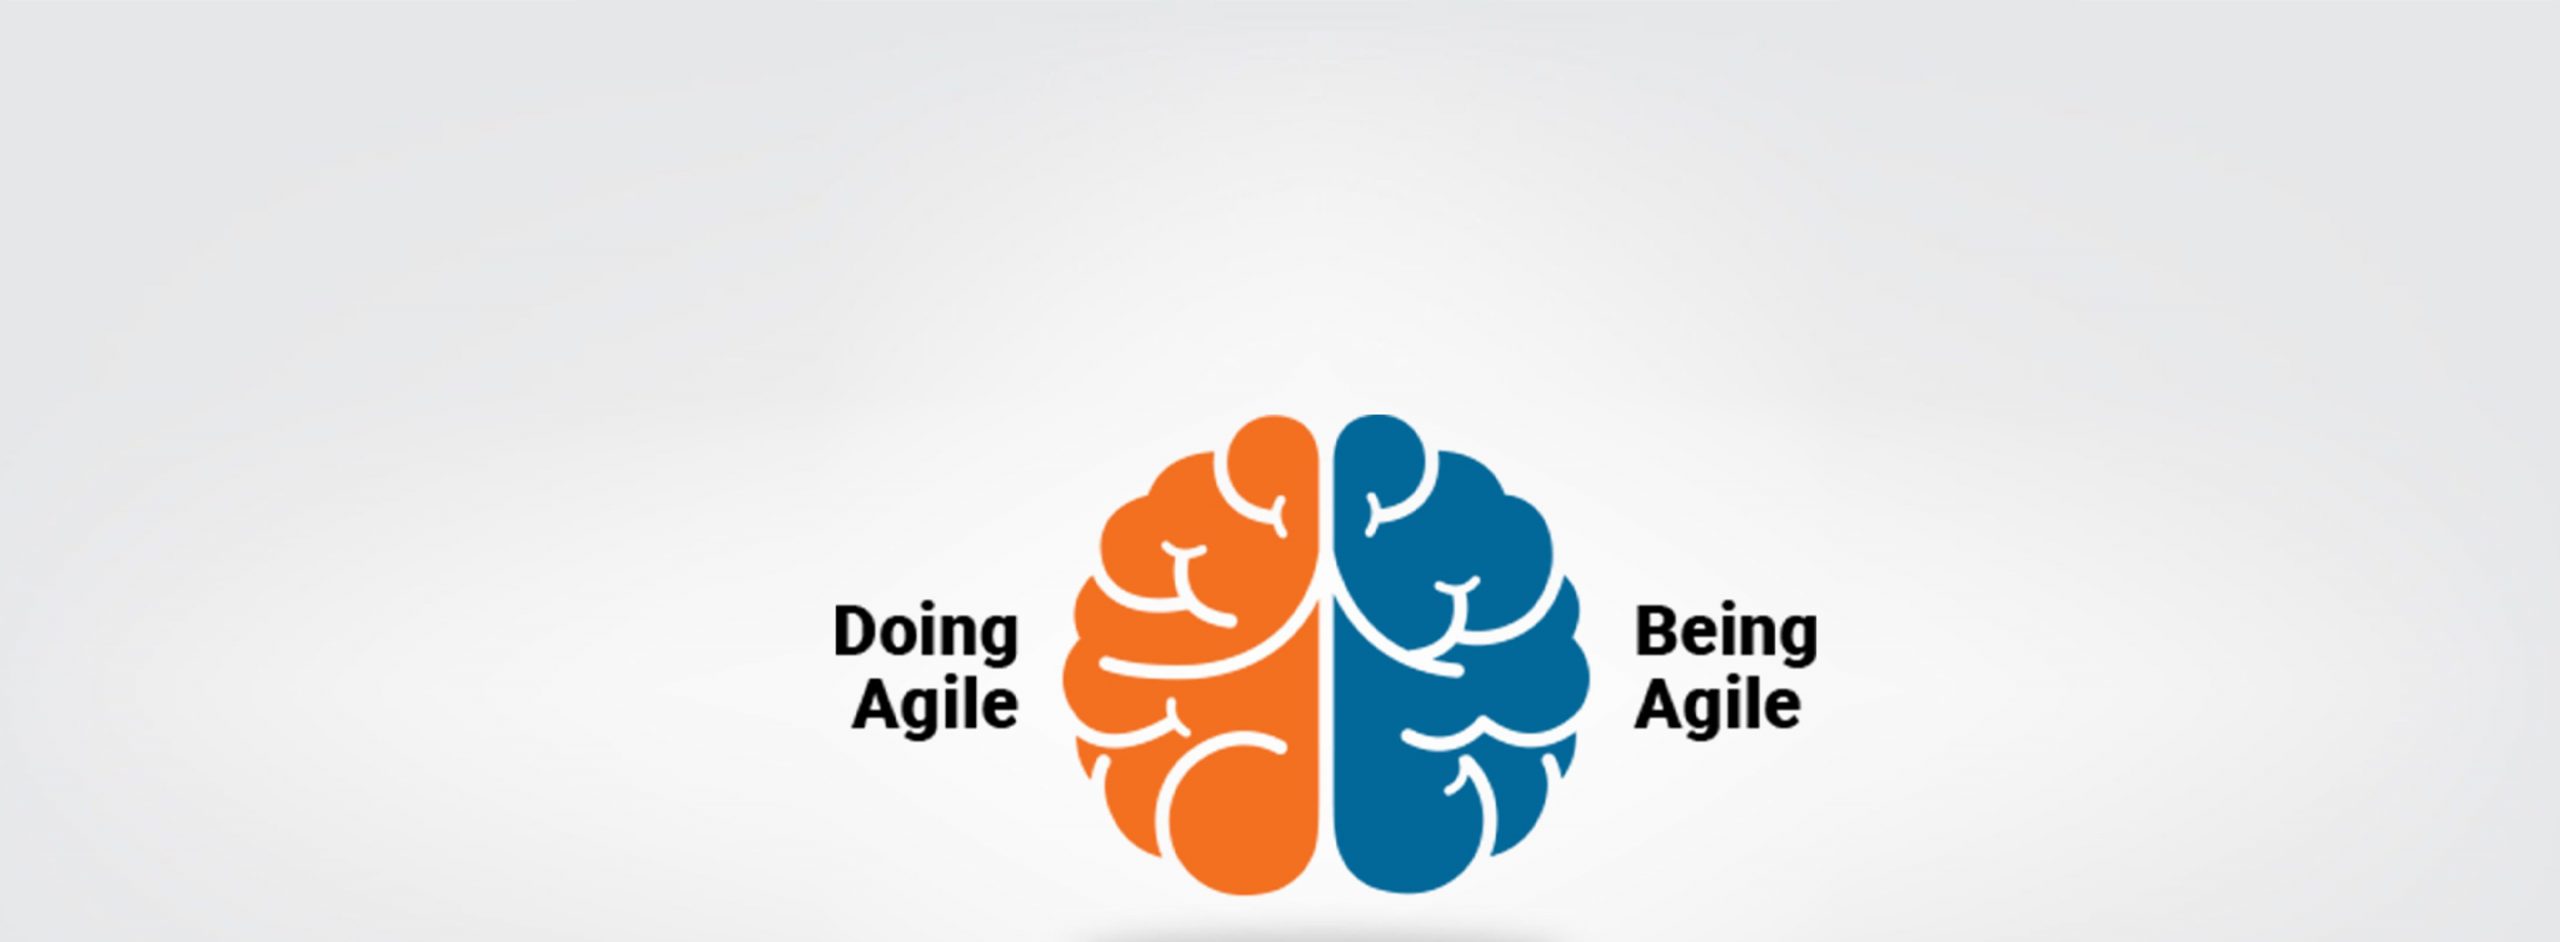 blog-banner-Stop-Doing-Agile-And-Start-being-Agile